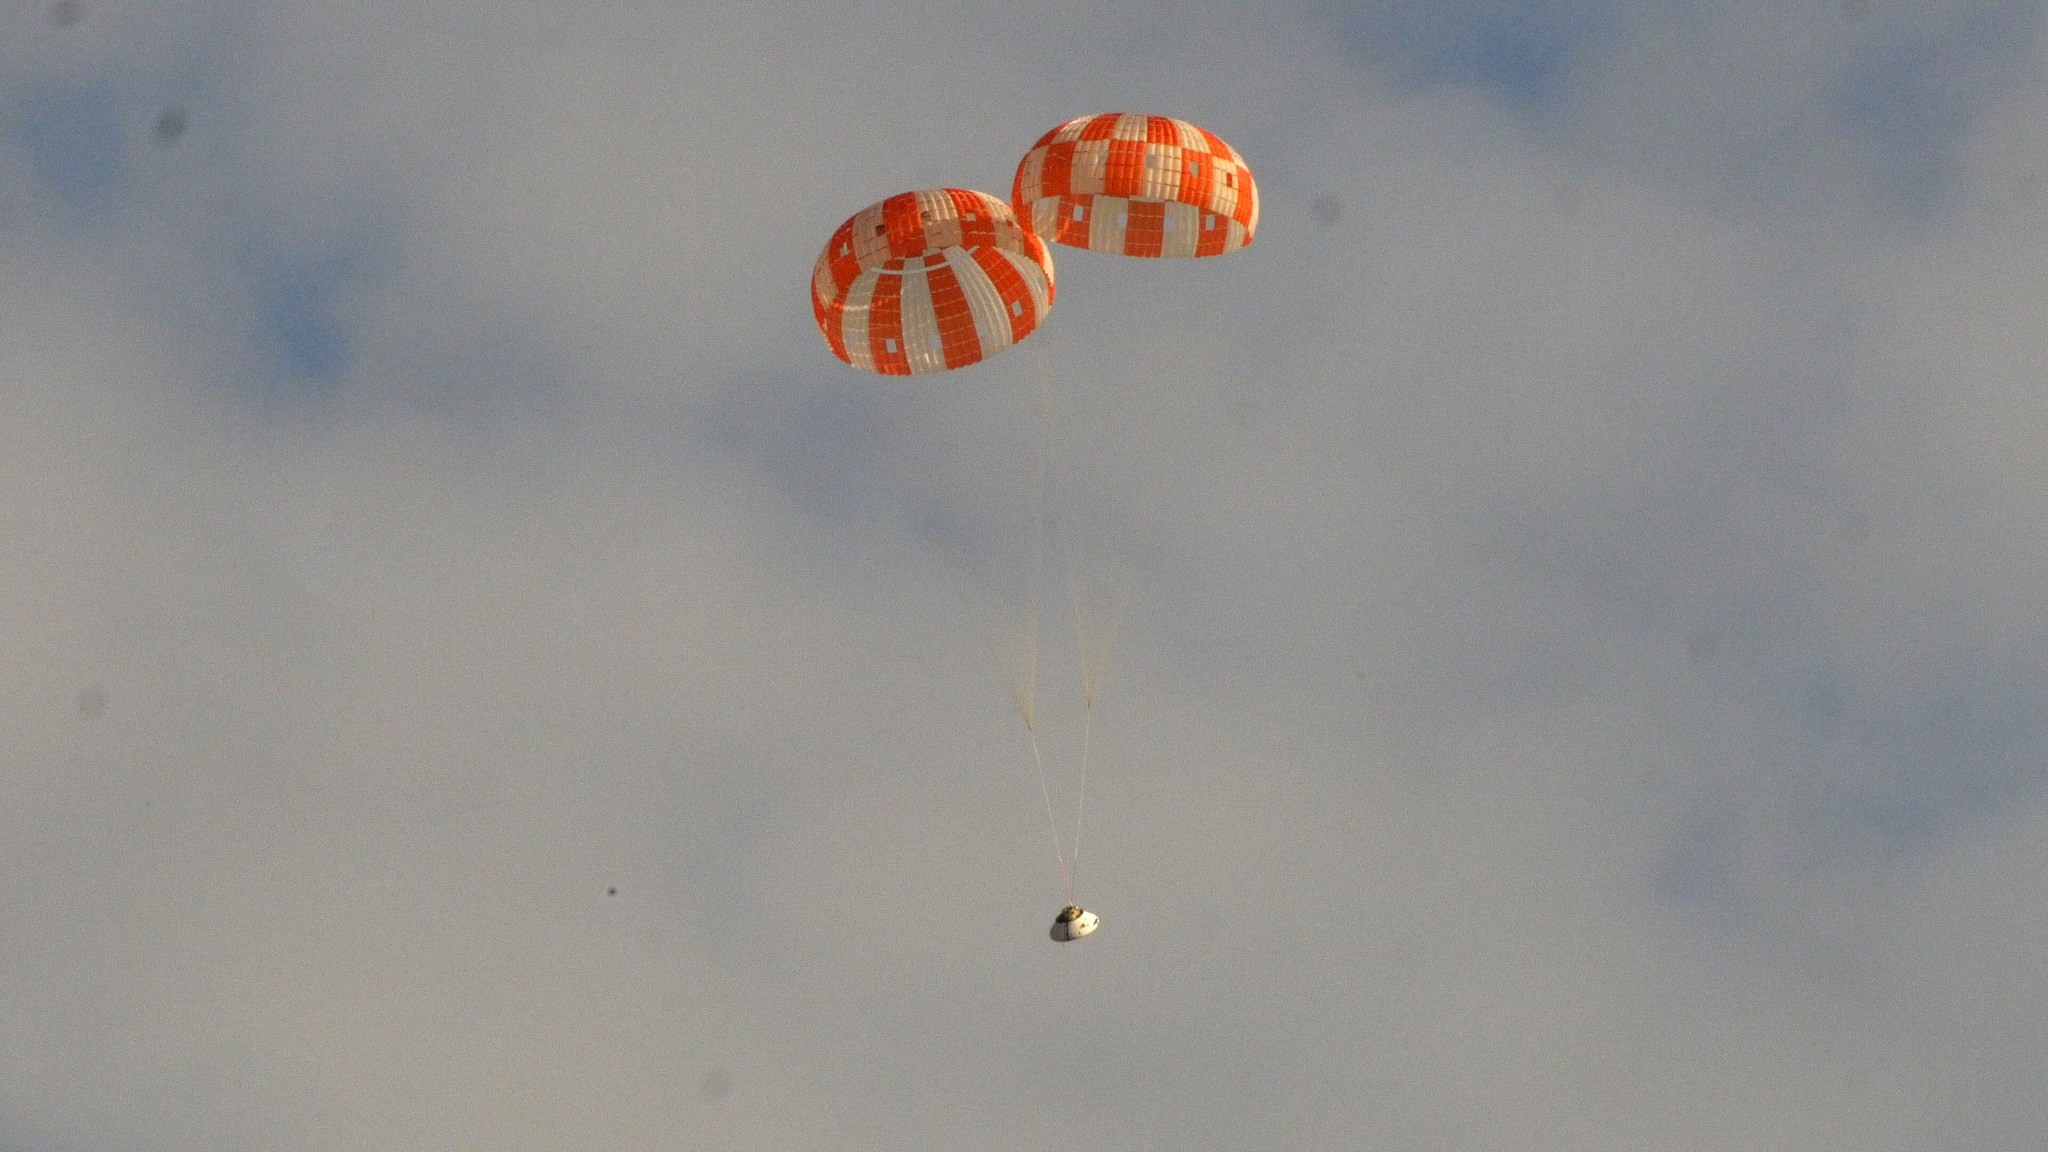 A test version of NASA's Orion spacecraft successfully landed under two main parachutes